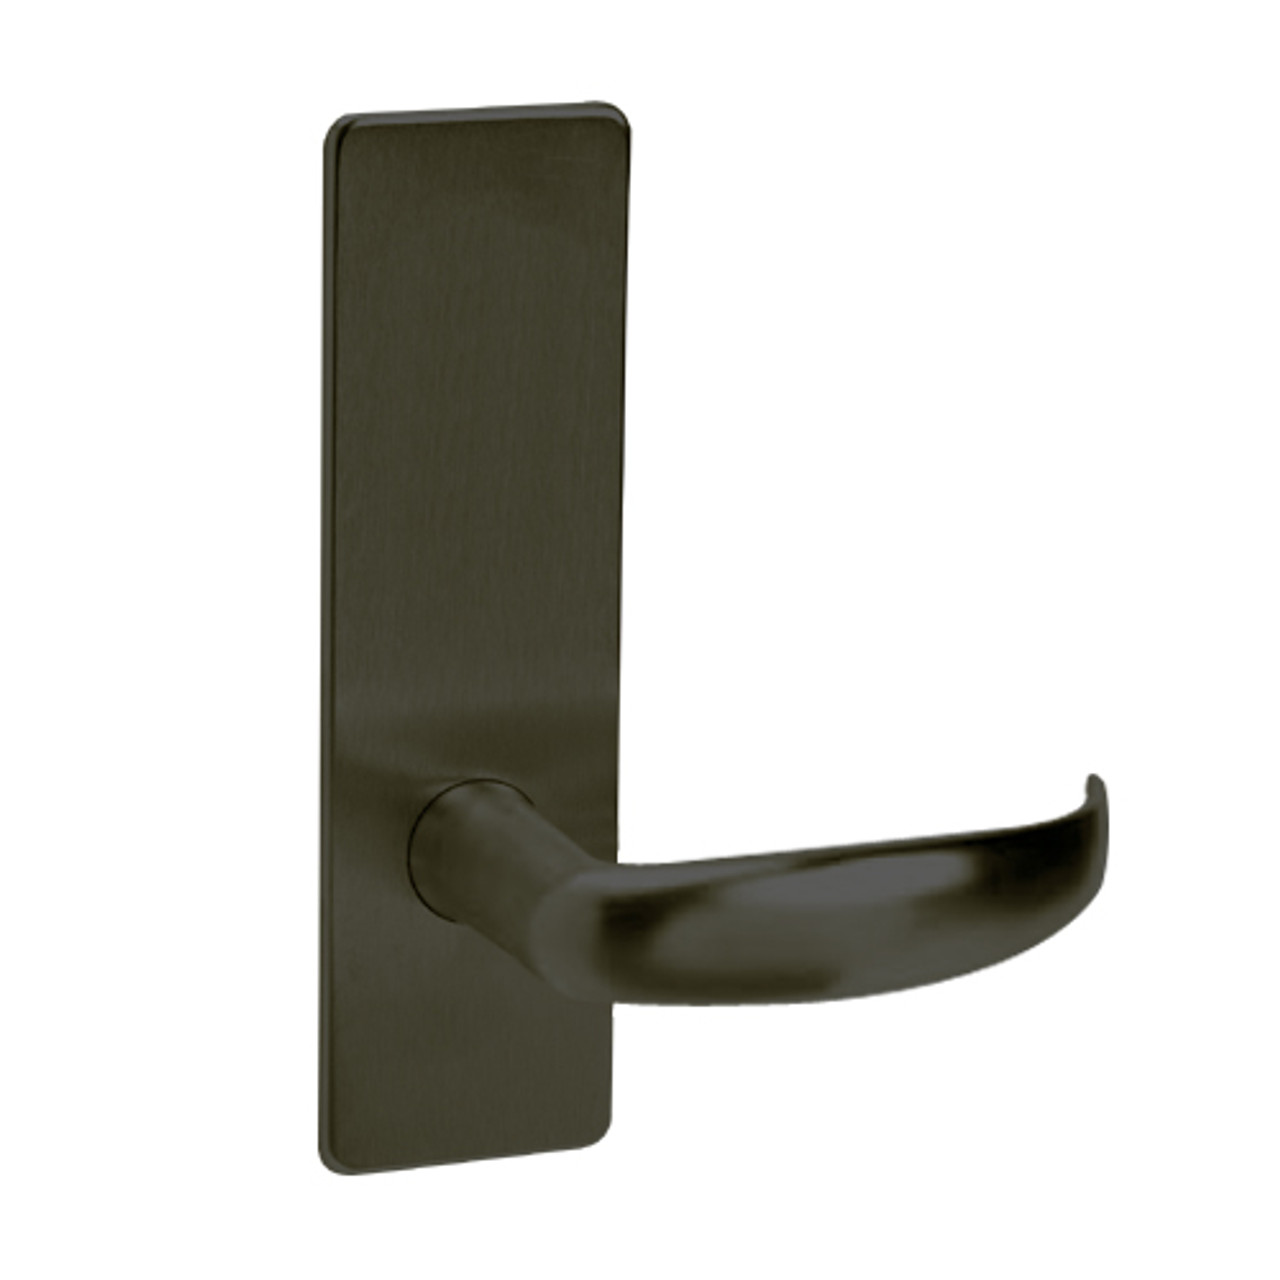 ML2010-PSR-613 Corbin Russwin ML2000 Series Mortise Passage Locksets with Princeton Lever in Oil Rubbed Bronze